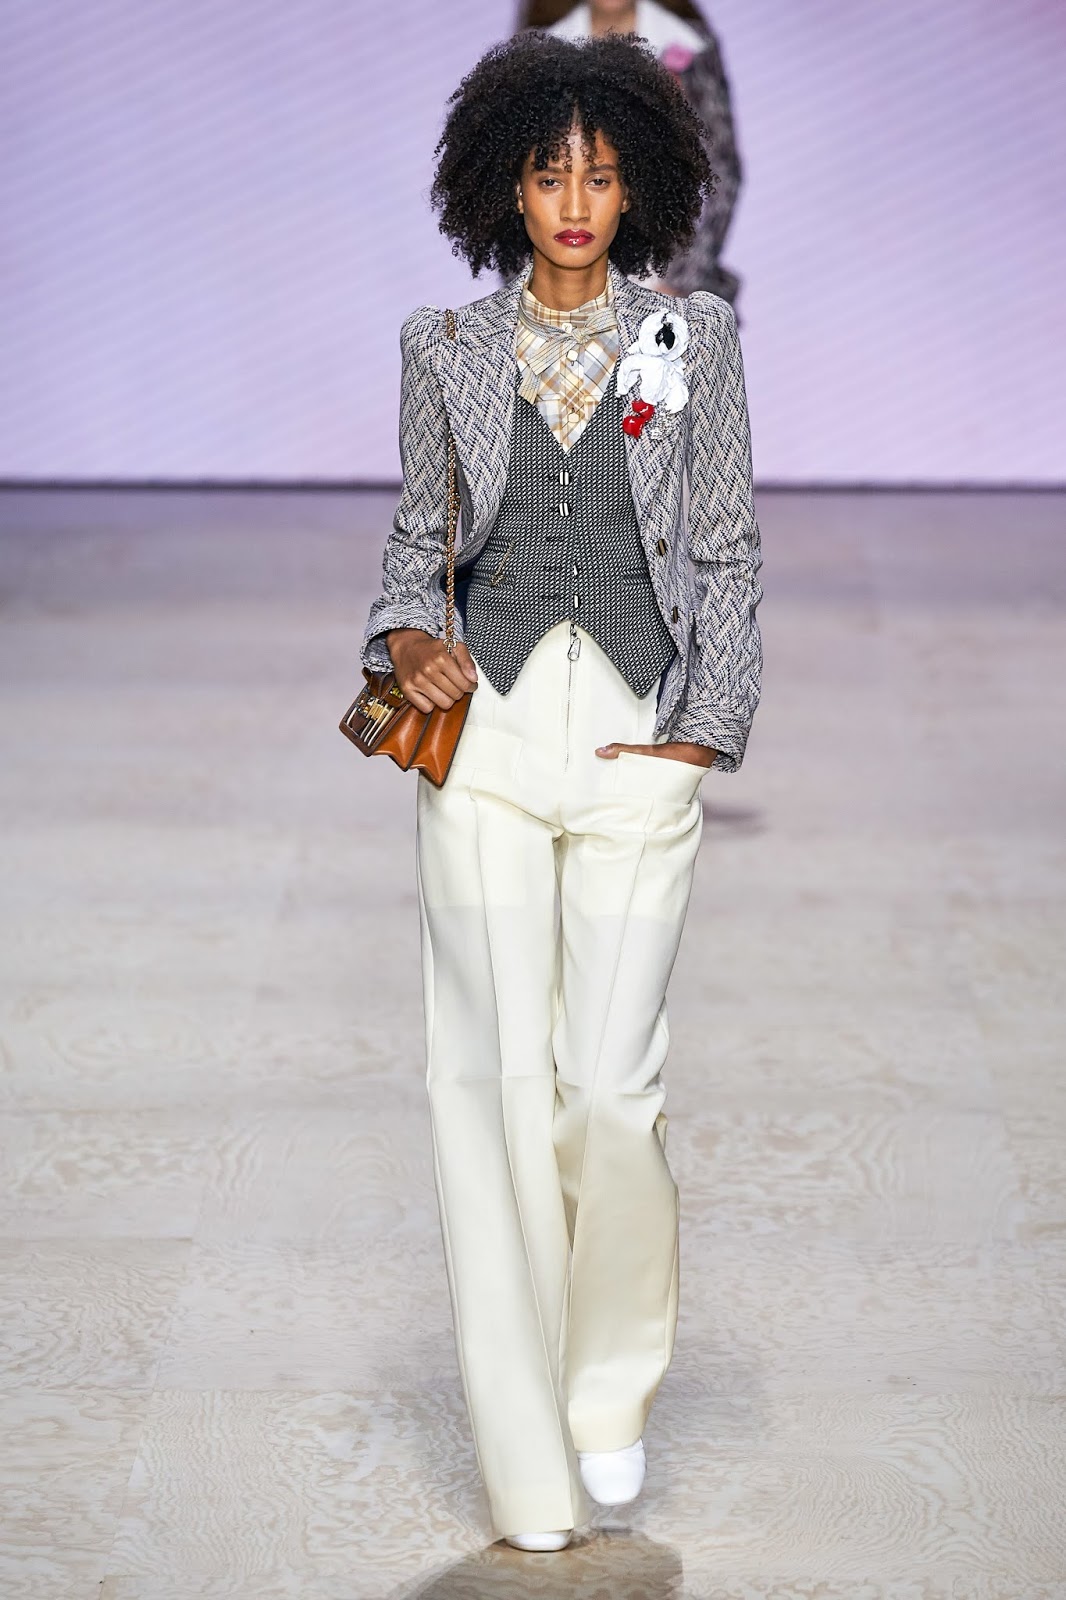 MIXING IT UP ON THE RUNWAY: LOUIS VUITTON